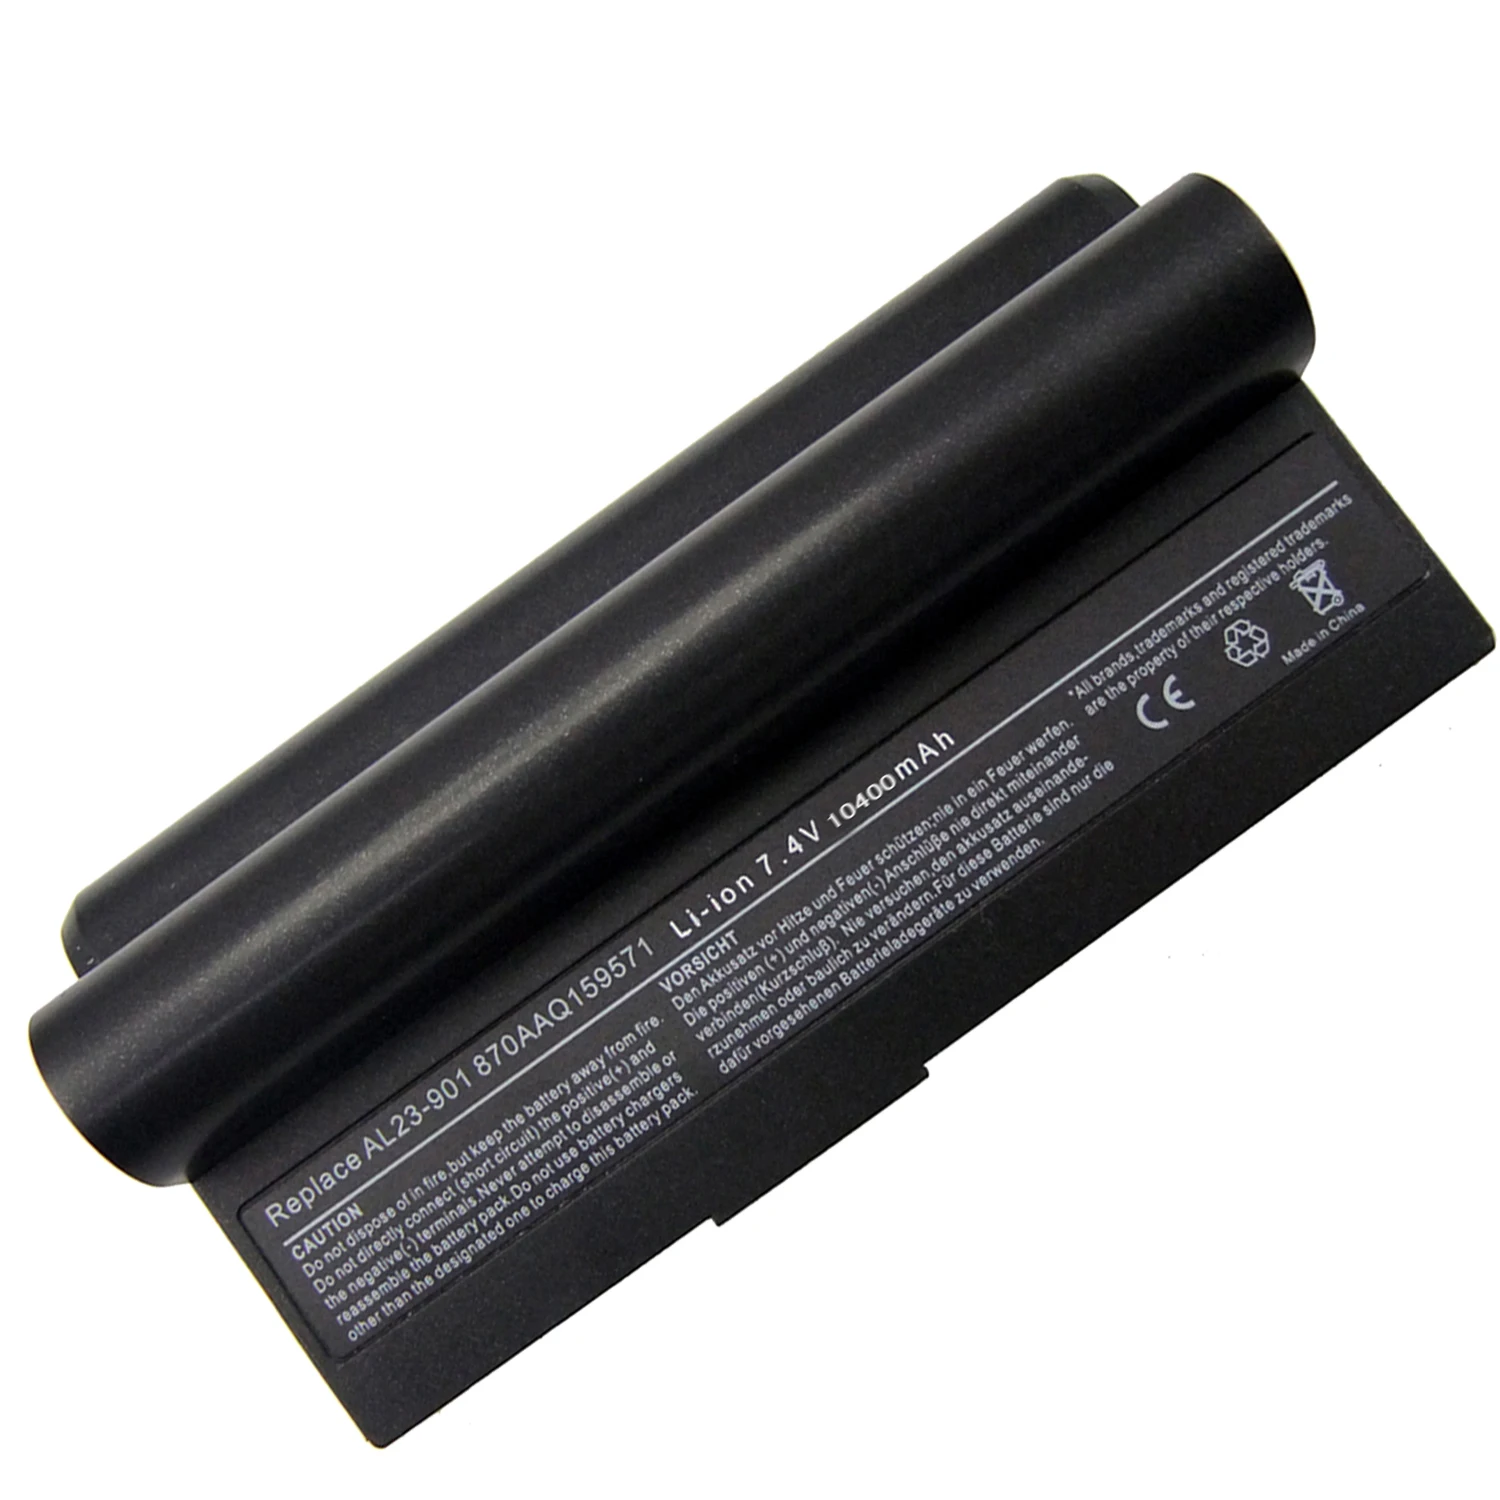 genopfyldning Ung som resultat Source Replacement laptop battery for Asus AL23-901 EEE PC 901, 904HD,  1000HA, 1000 Black on m.alibaba.com